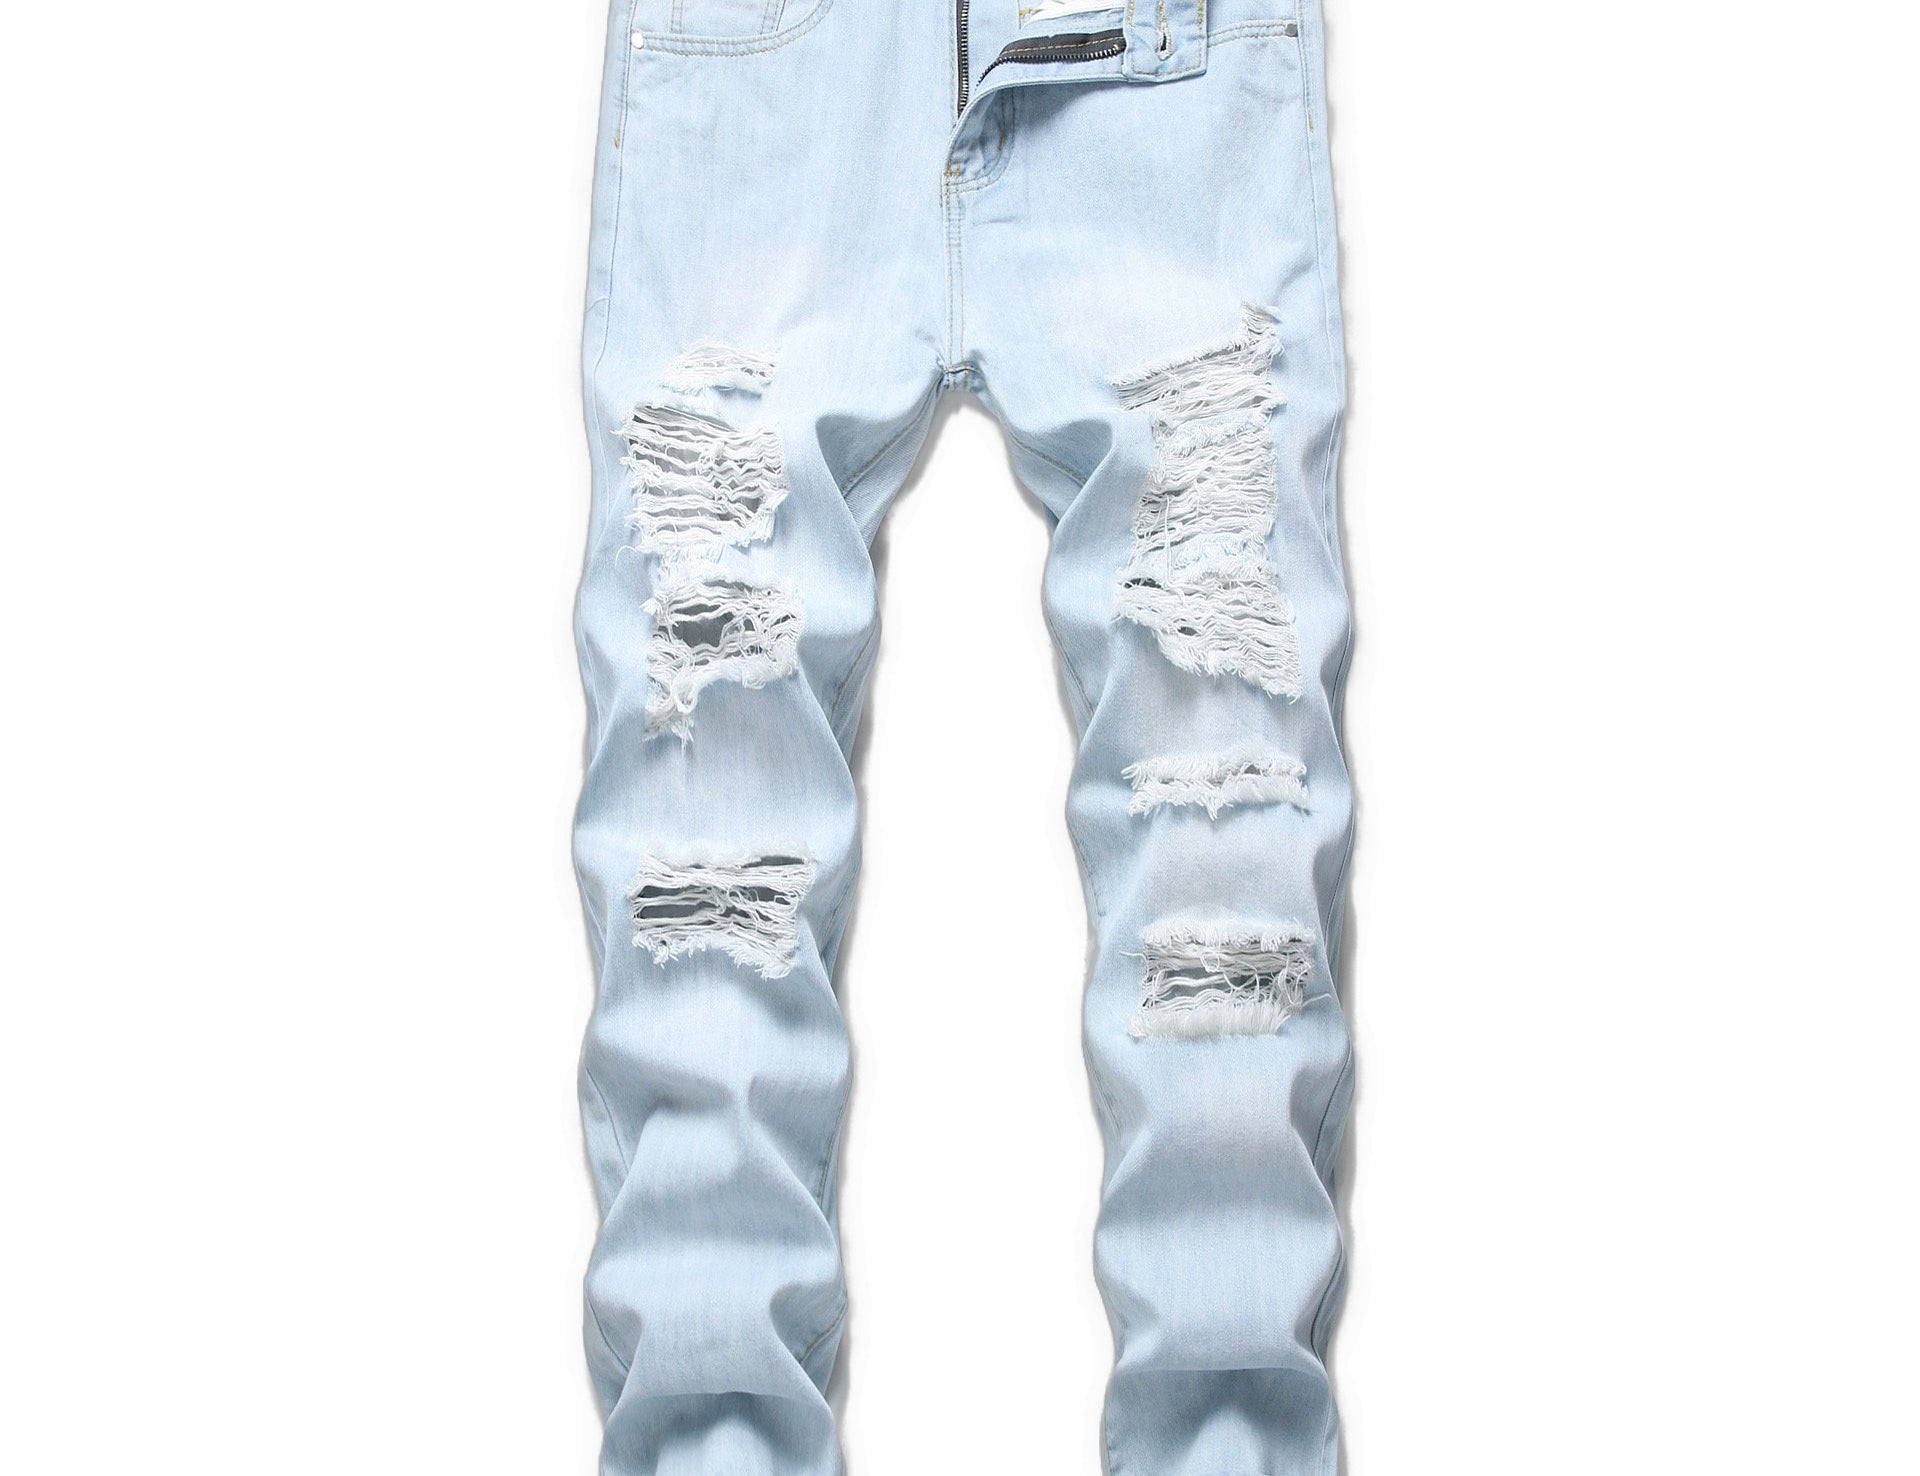 CHGY - Denim Jeans for Men - Sarman Fashion - Wholesale Clothing Fashion Brand for Men from Canada